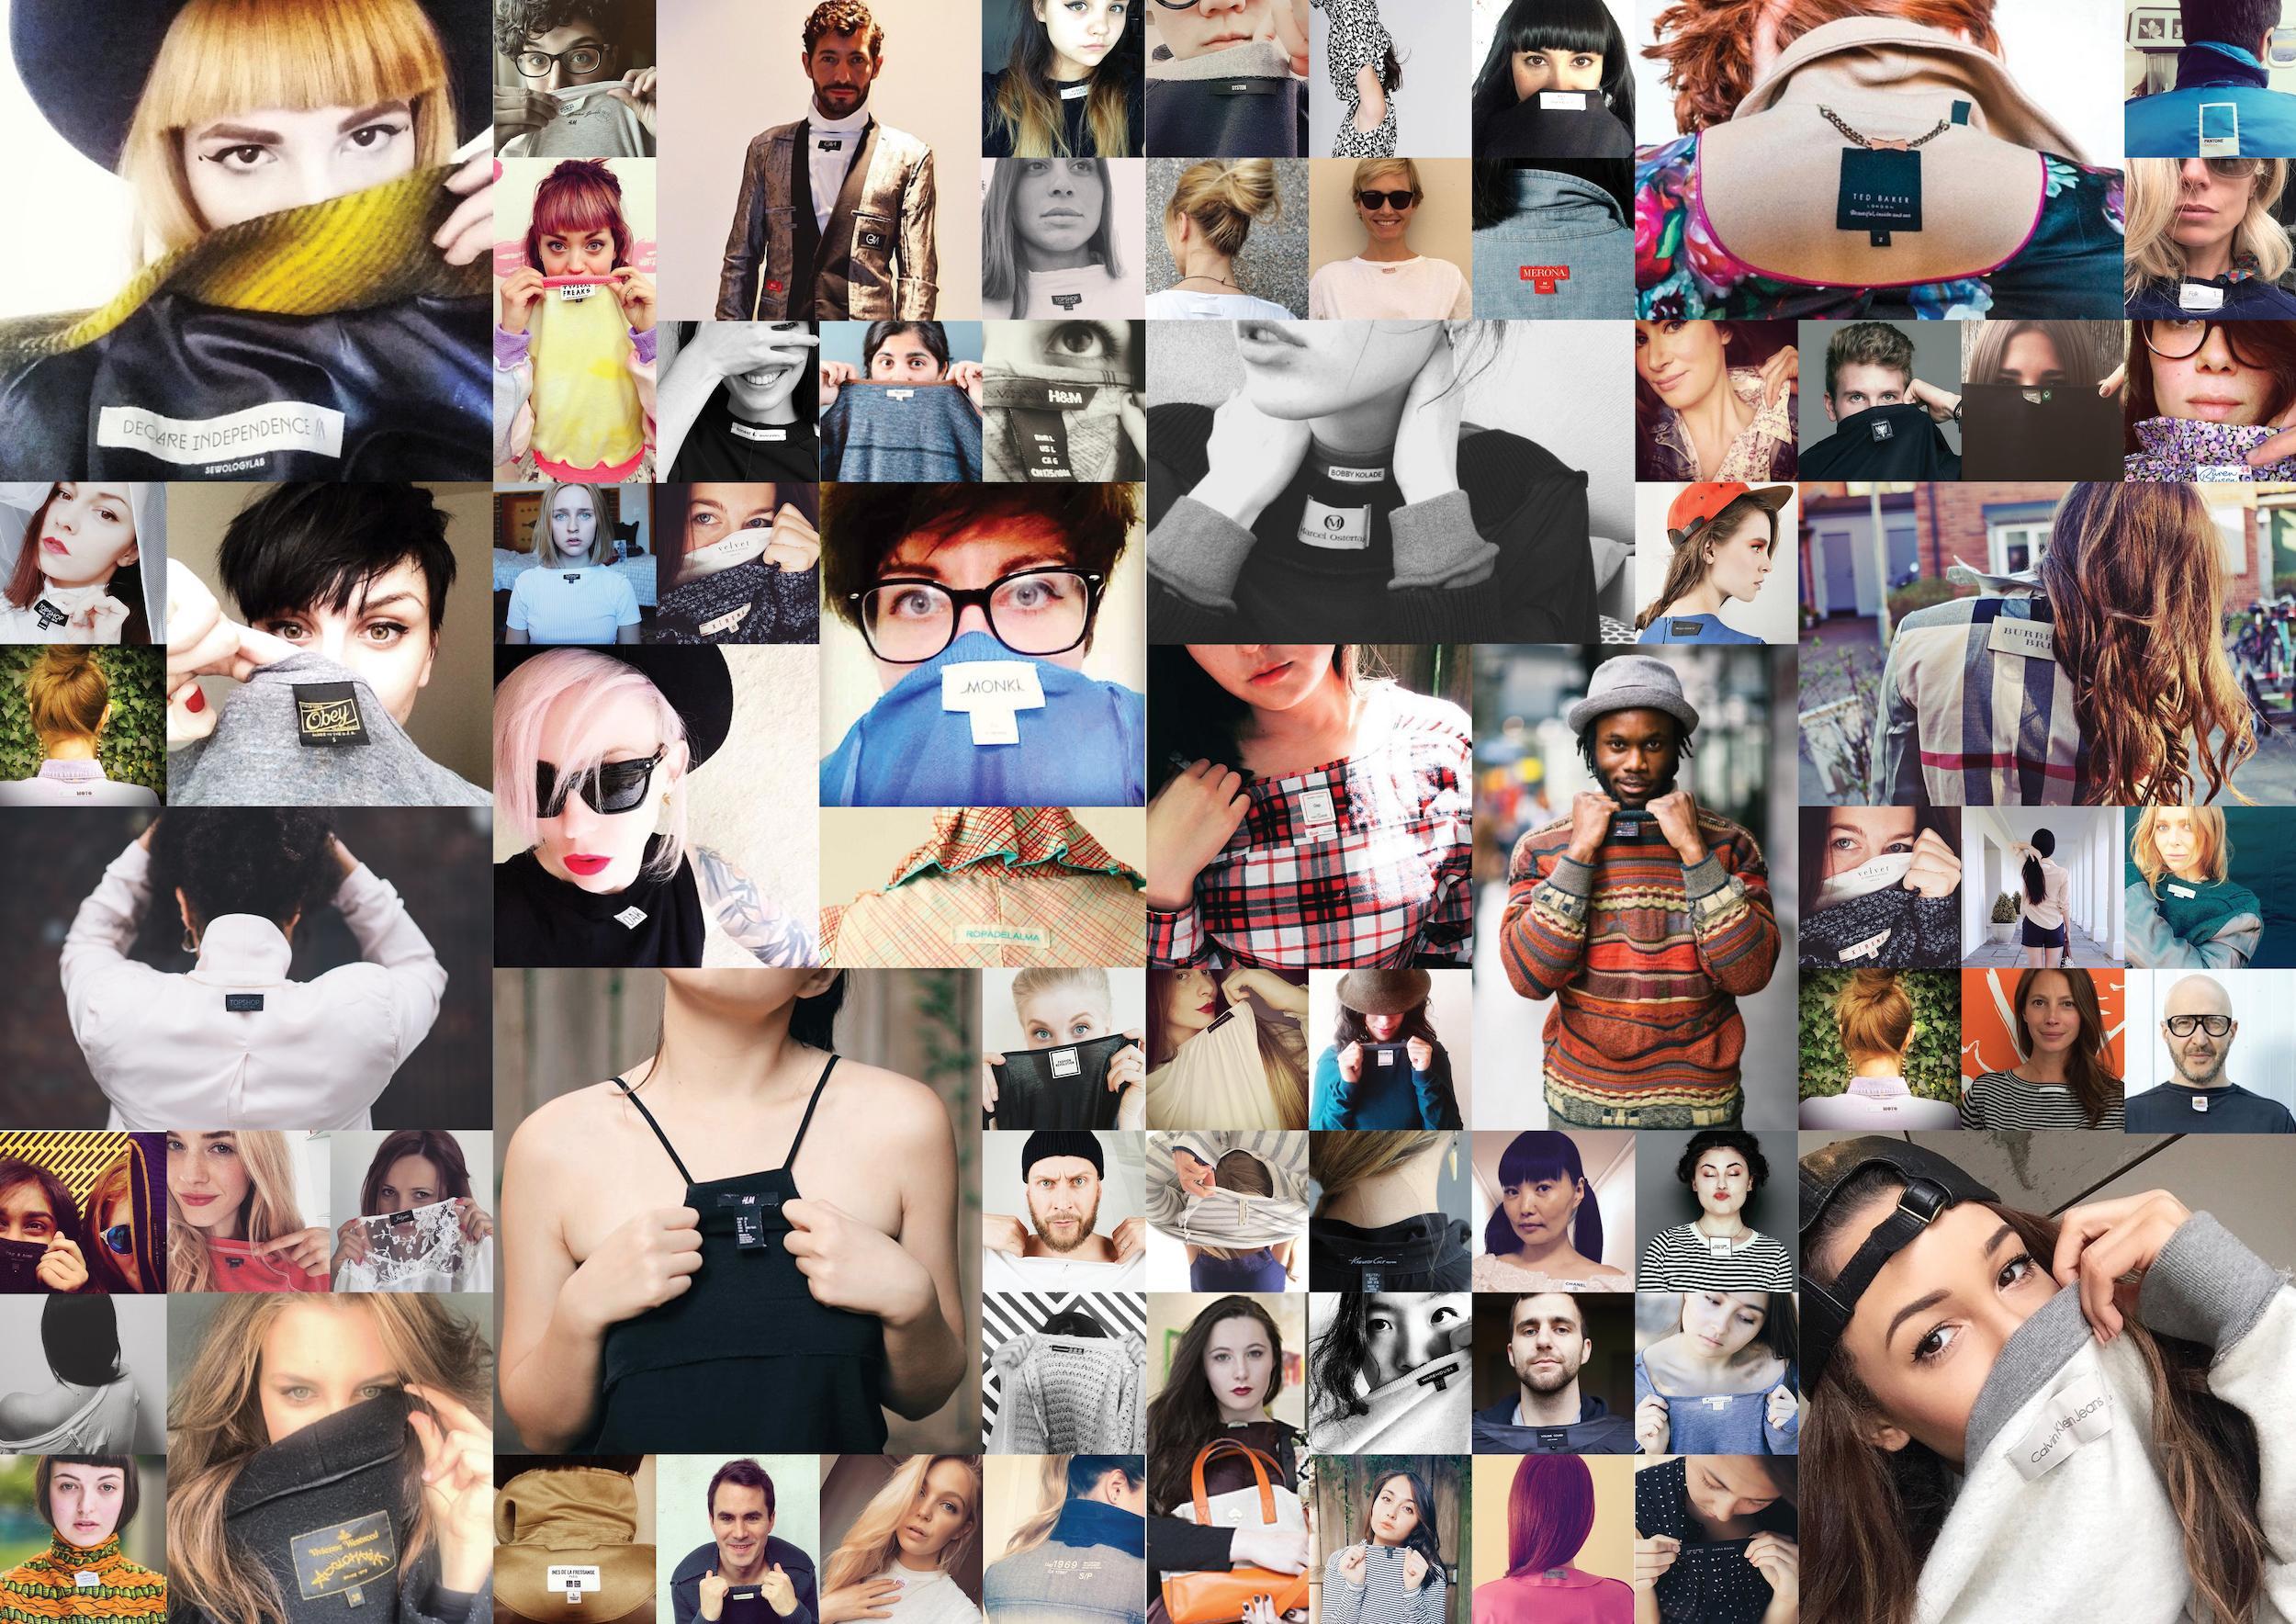 Fashion Revolution’s #whomademyclothes is already trending on Twitter and Instagram